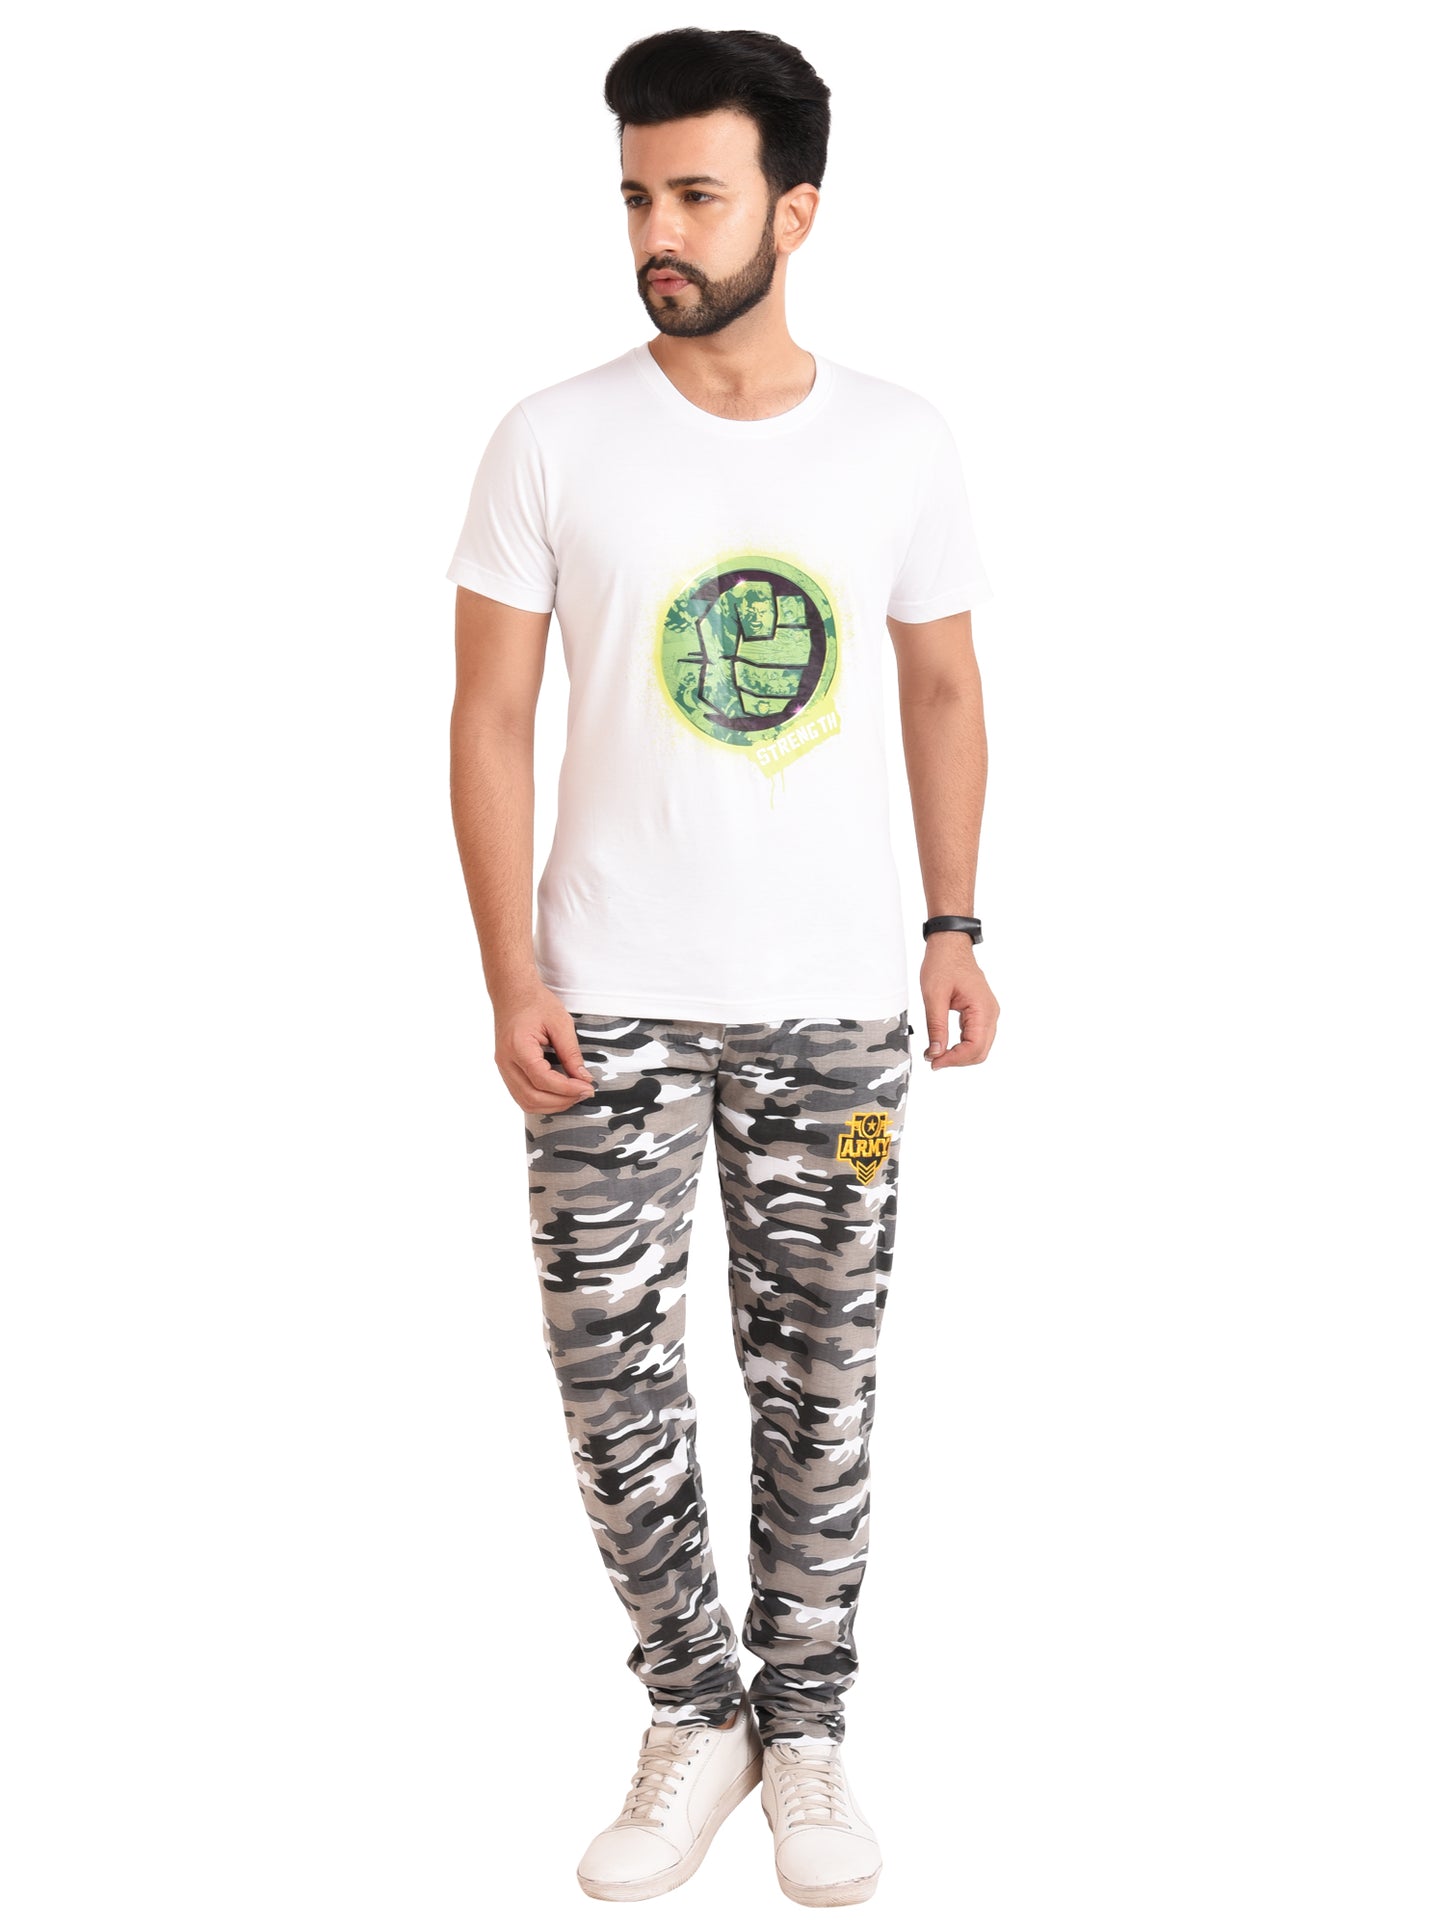 Neo Garments Men's Cotton Camouflage Track Pant. | GREY-WHITE | SIZES FROM M TO 5XL.